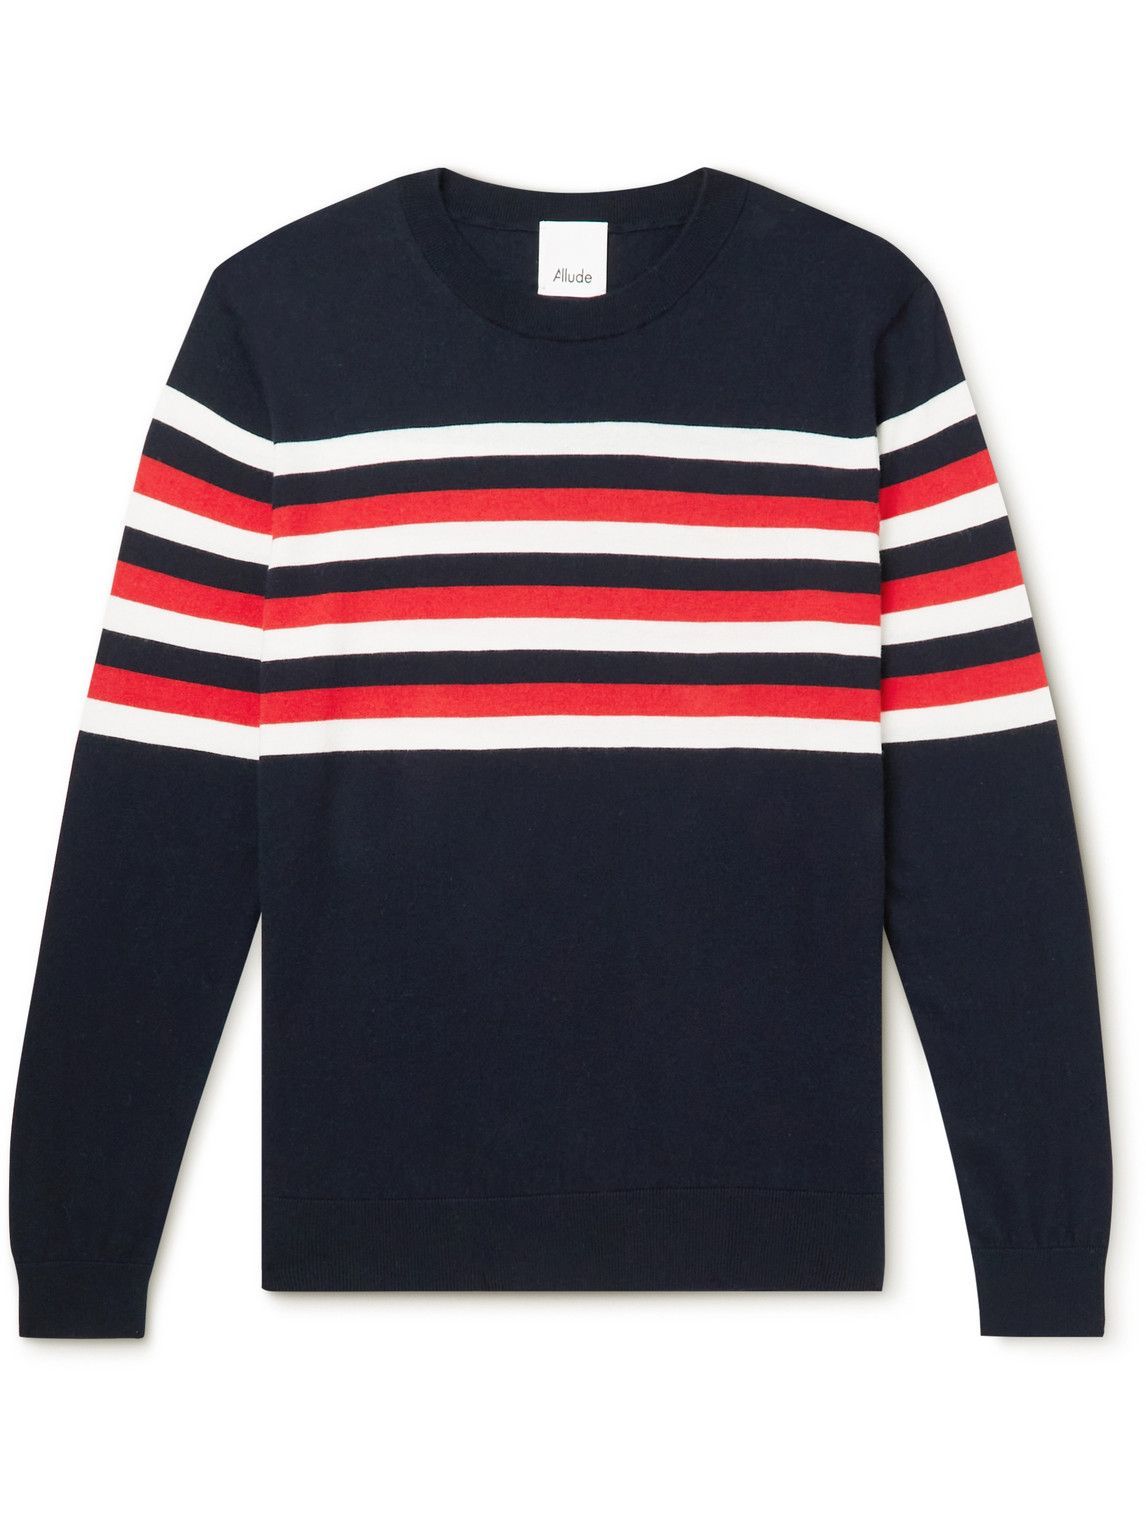 Allude - Striped Cotton and Cashmere-Blend Sweater - Blue